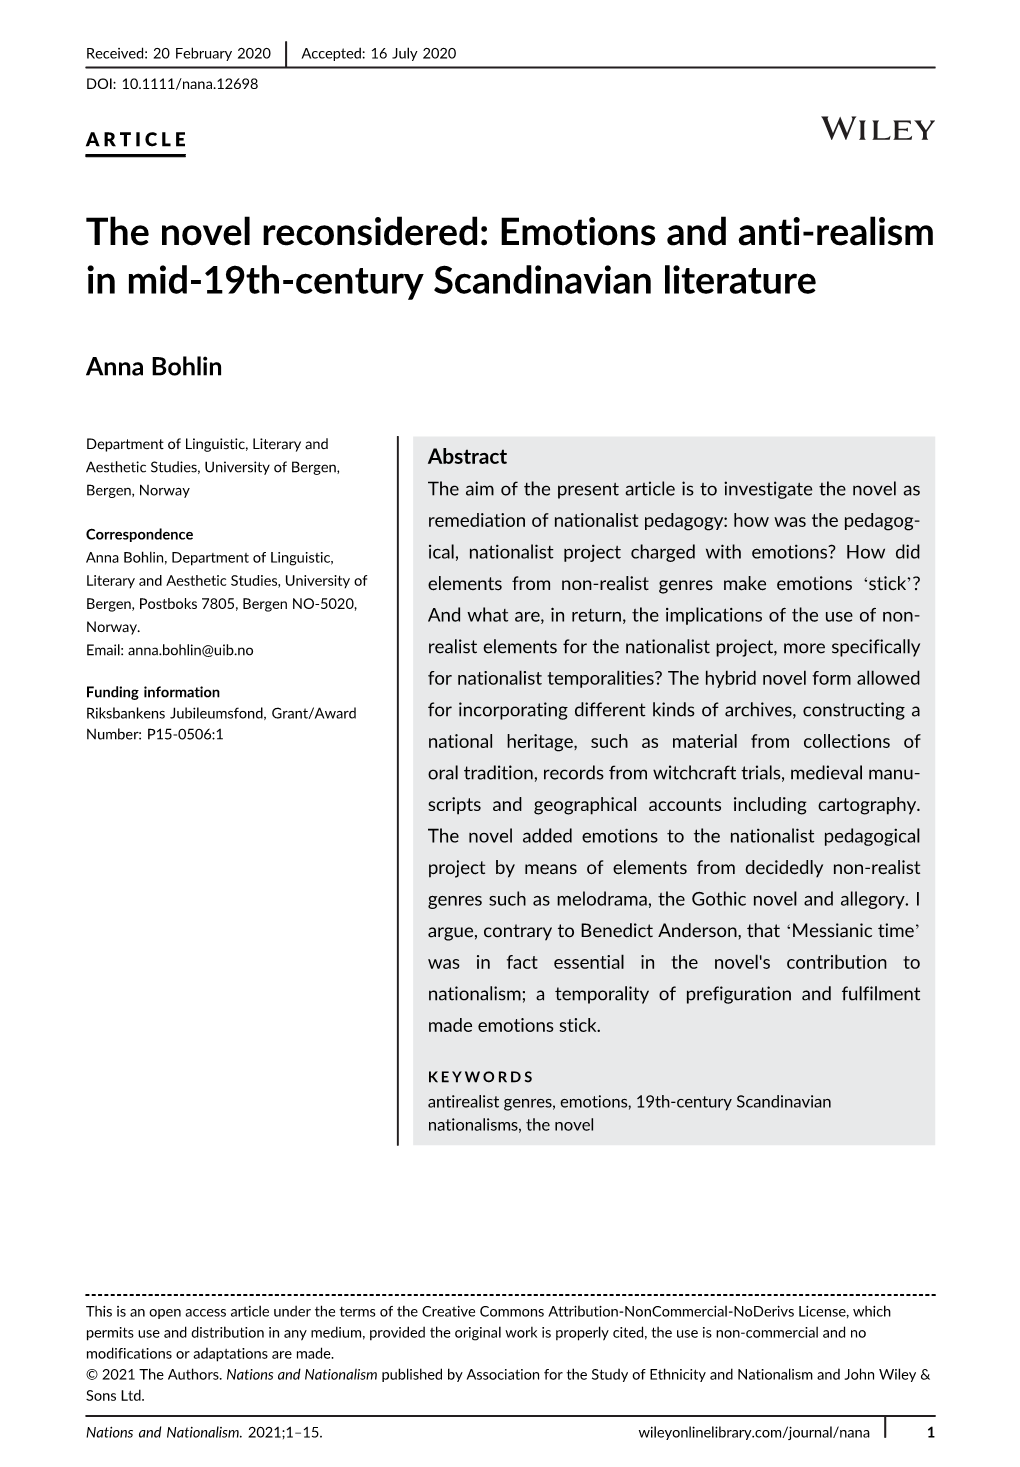 The Novel Reconsidered: Emotions and Anti-Realism in Mid-19Th-Century Scandinavian Literature